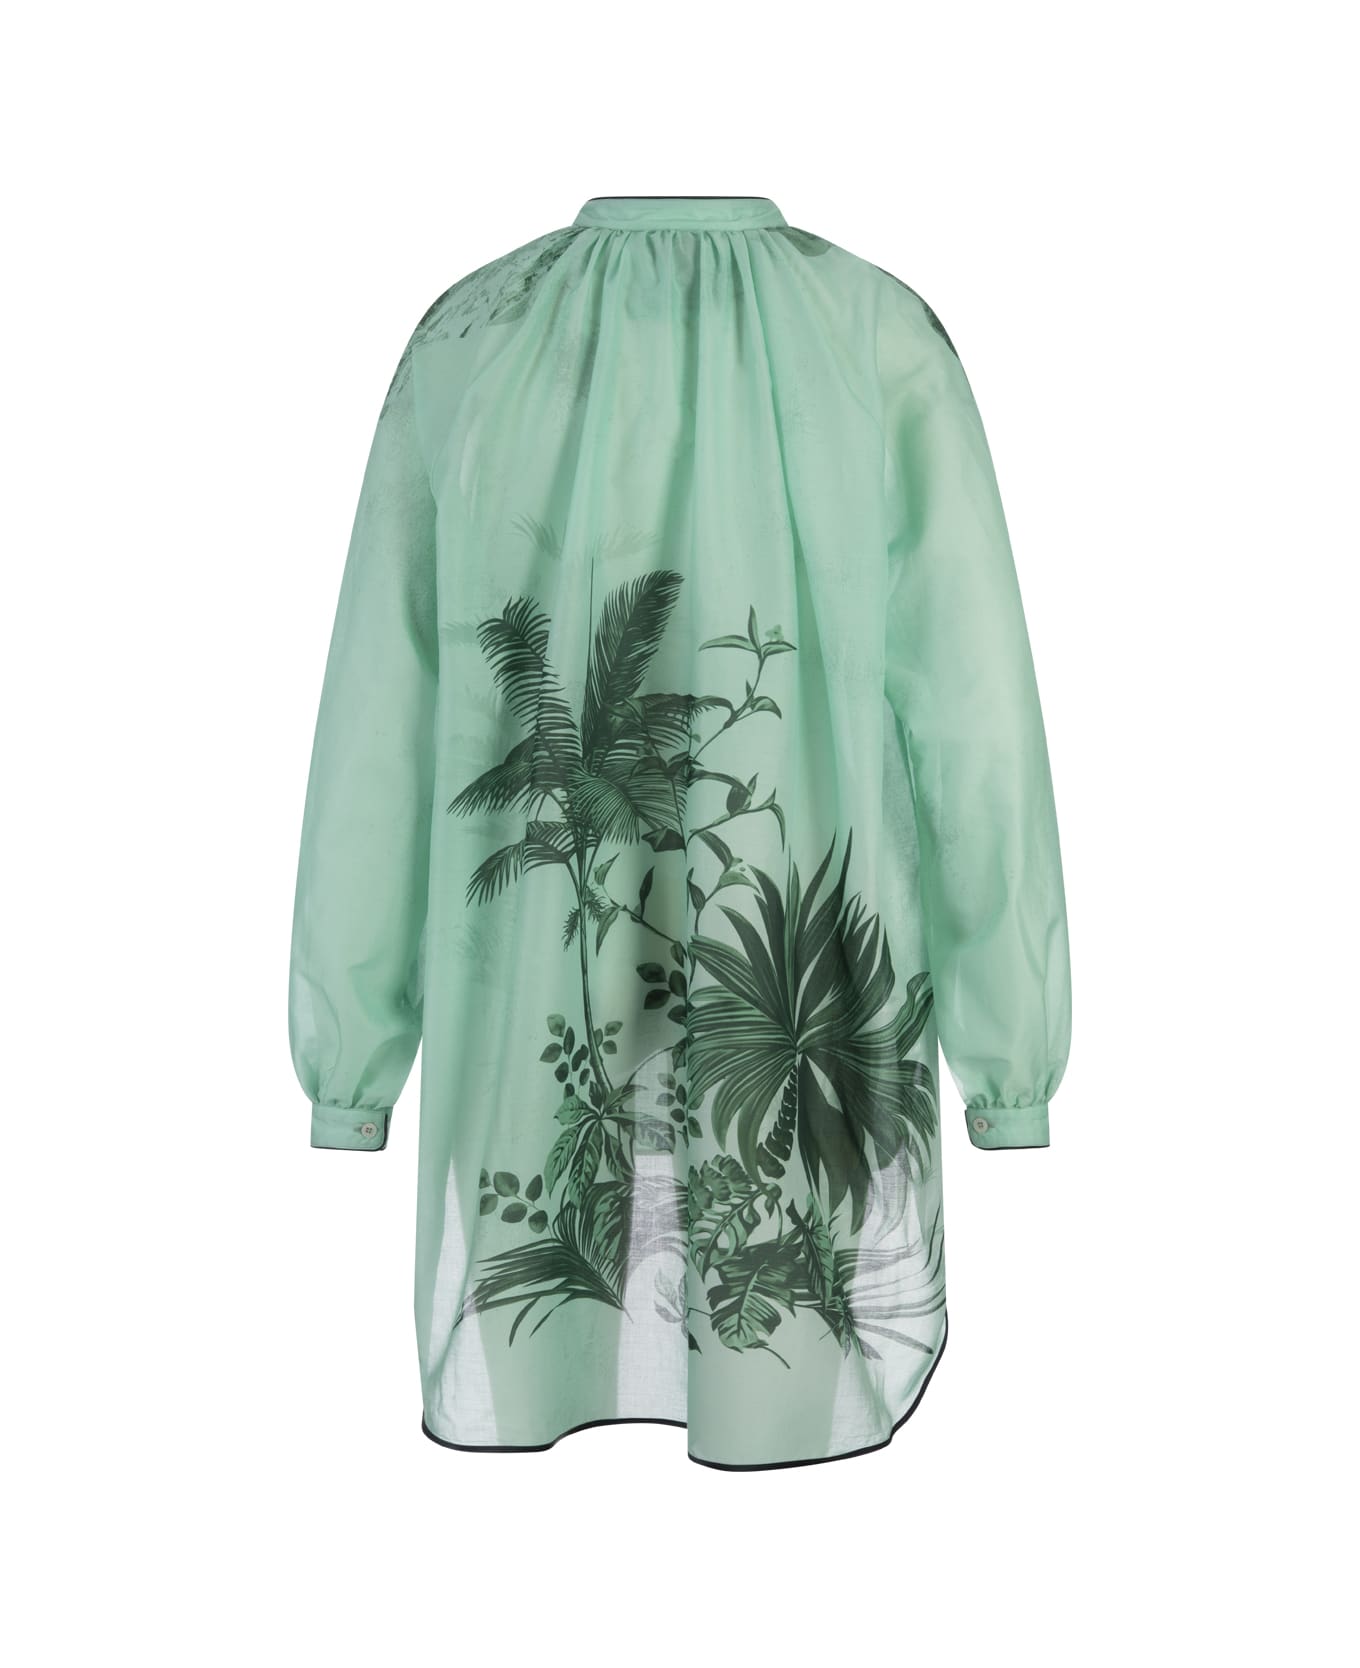 For Restless Sleepers Flowers Green Tizio Shirt - Green